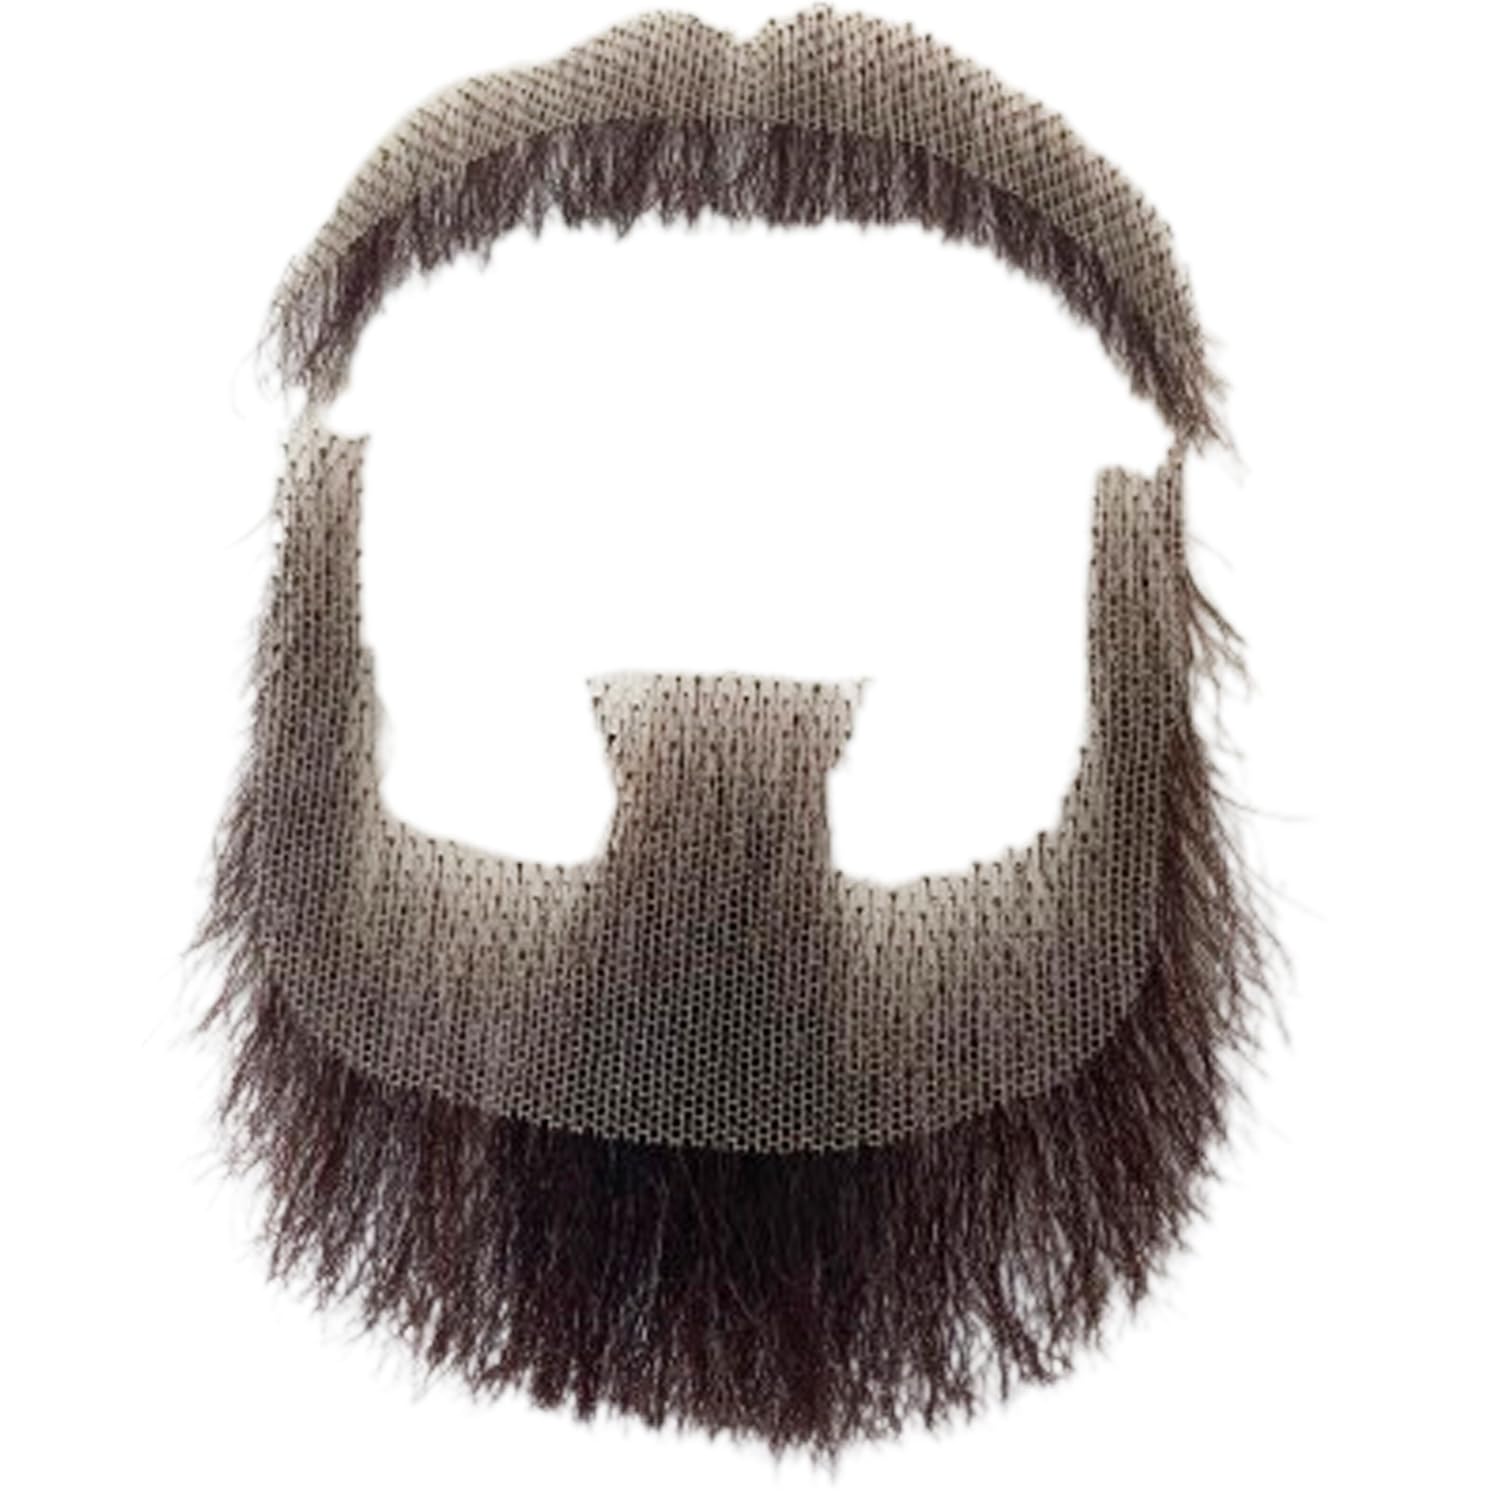 Volora Fake Beard Realistic Human Hair Full Hand Tied Facial Hair False Beards Lace Invisible Fake Face Mustache for Party Movie Makeup Halloween Cosplay Costume Party (Style-1, Brown)